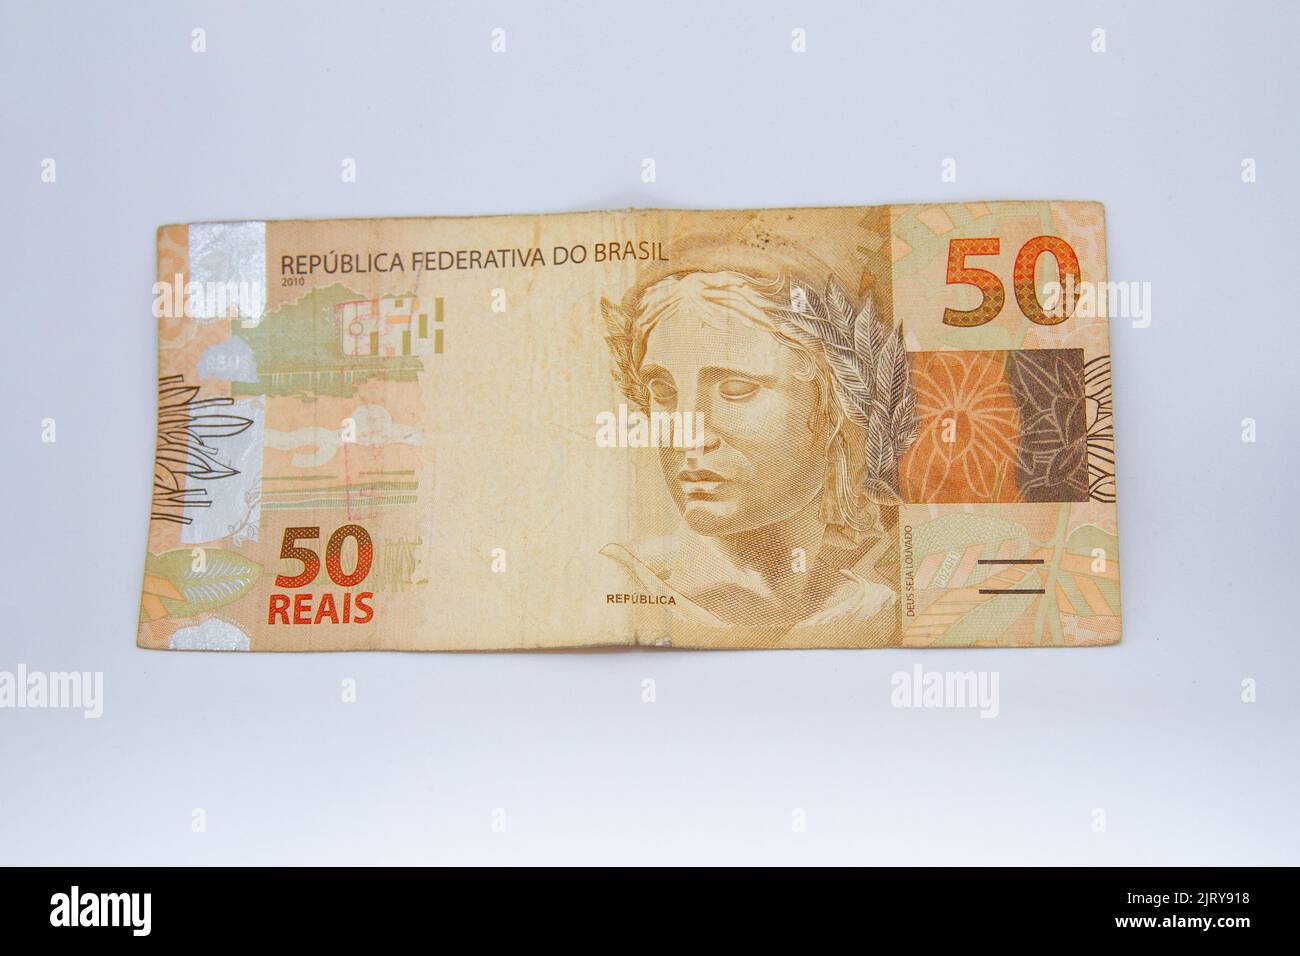 fifty reais banknote (Brazilian currency) on a white background in Brazil Stock Photo